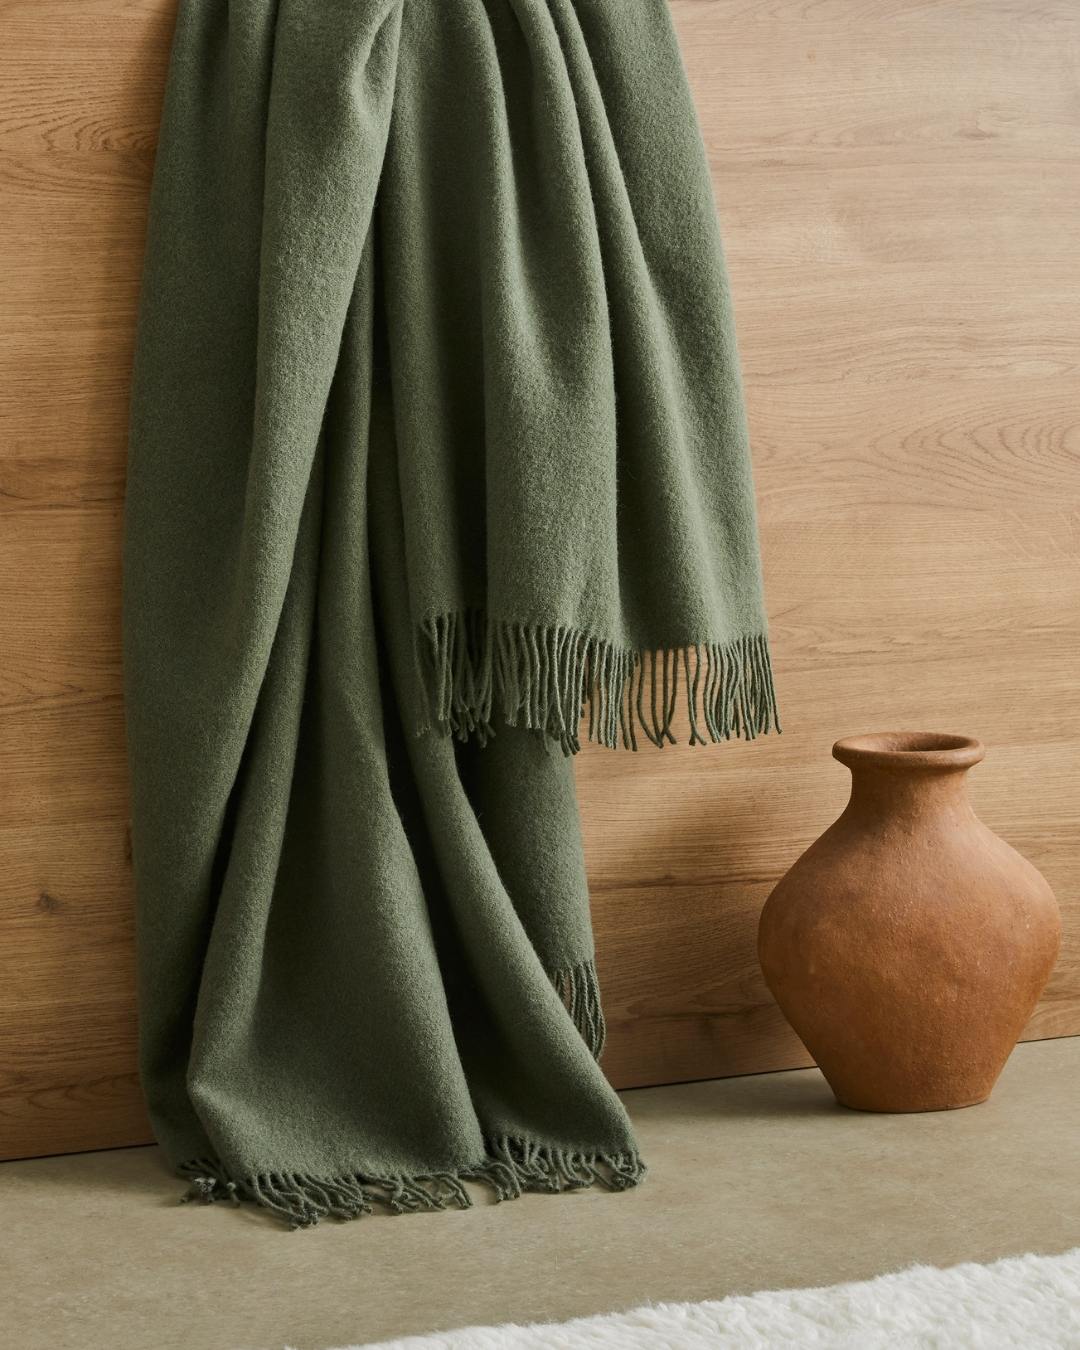 Our Nevis throw is a simple, uni-coloured design made from high-performing and sustainable wool — perfect for every home and a piece that will be treasured for years to come.  At 130cm x 200cm in size, it is perfect for styling as a throw blanket on your couch or to add a pop of colour to your bed.